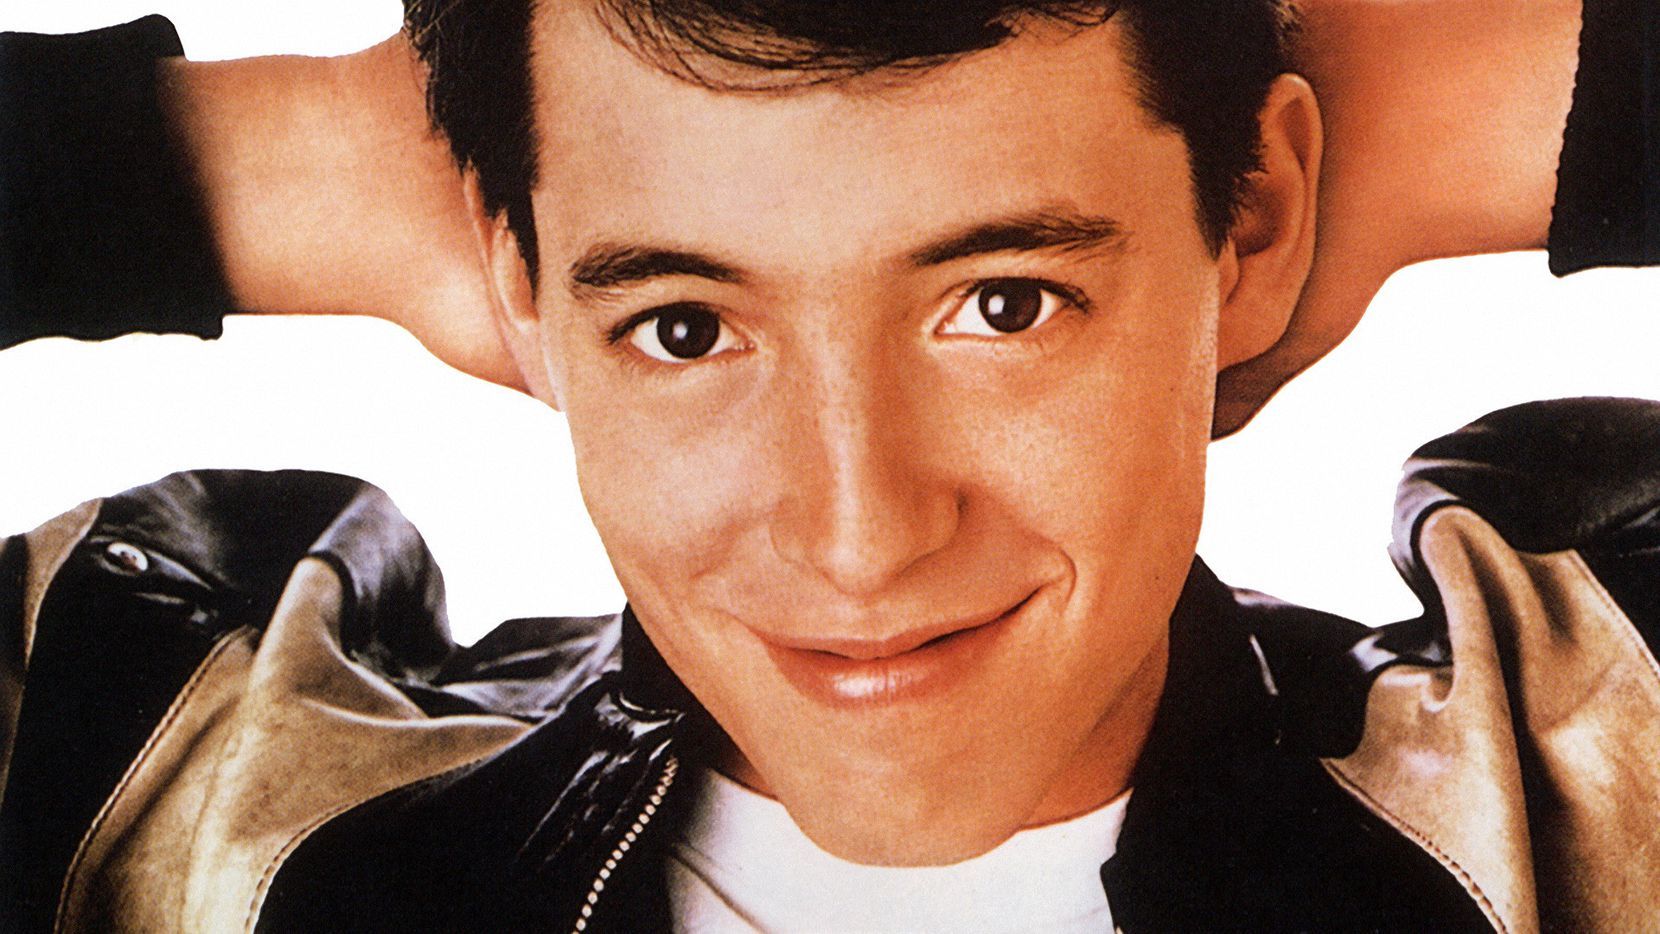 Ferris Bueller's Day Off: The best movie soundtrack that never was